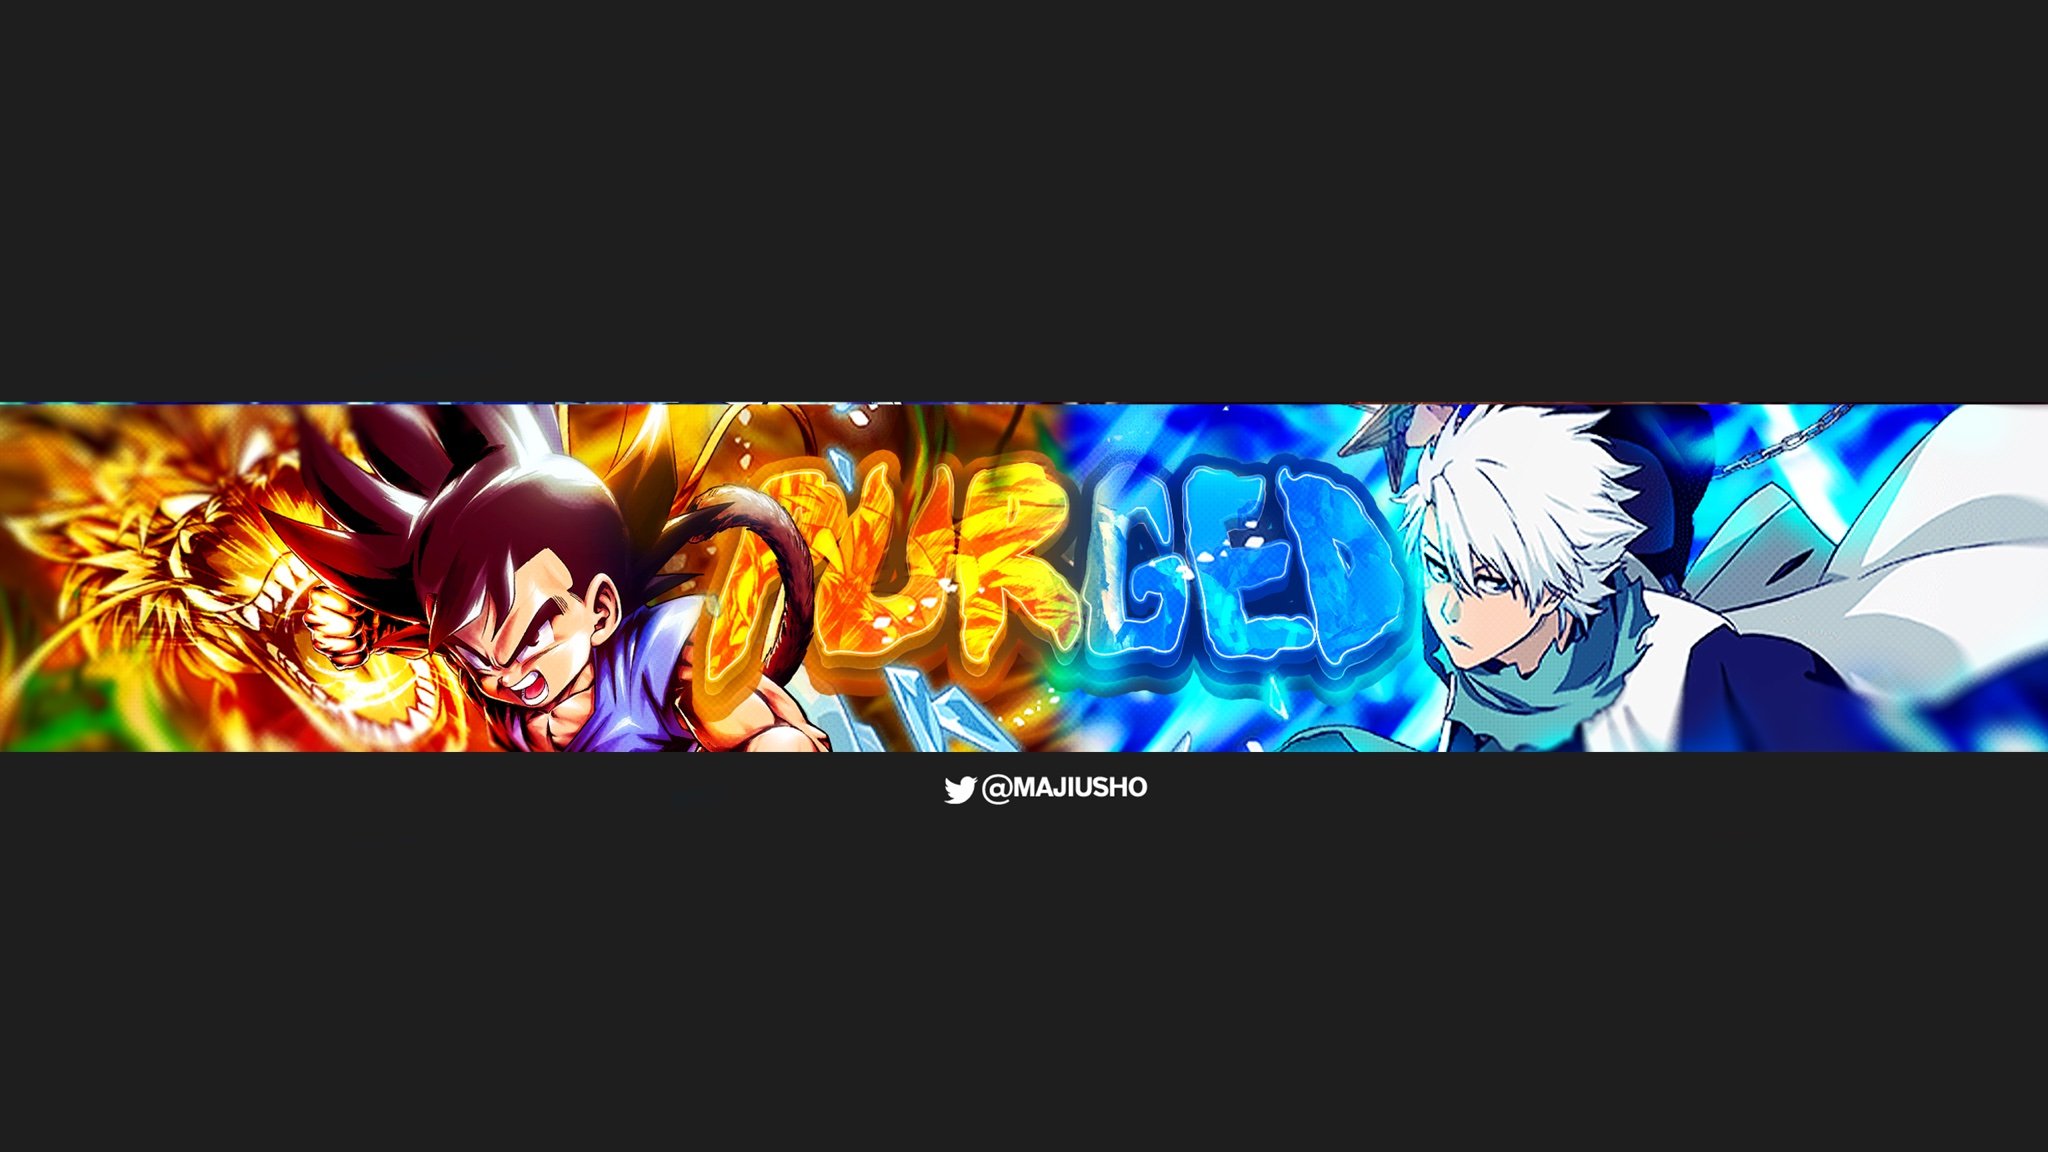 ✨Majiusho Banner For Would really appreciate a like or retweet! #anime #gfx #gfxeditor #commission #commissionopen #art #intro #outro #gaming #gamer #demonslayer #naruto #dragonball #editor #banner #animebanner